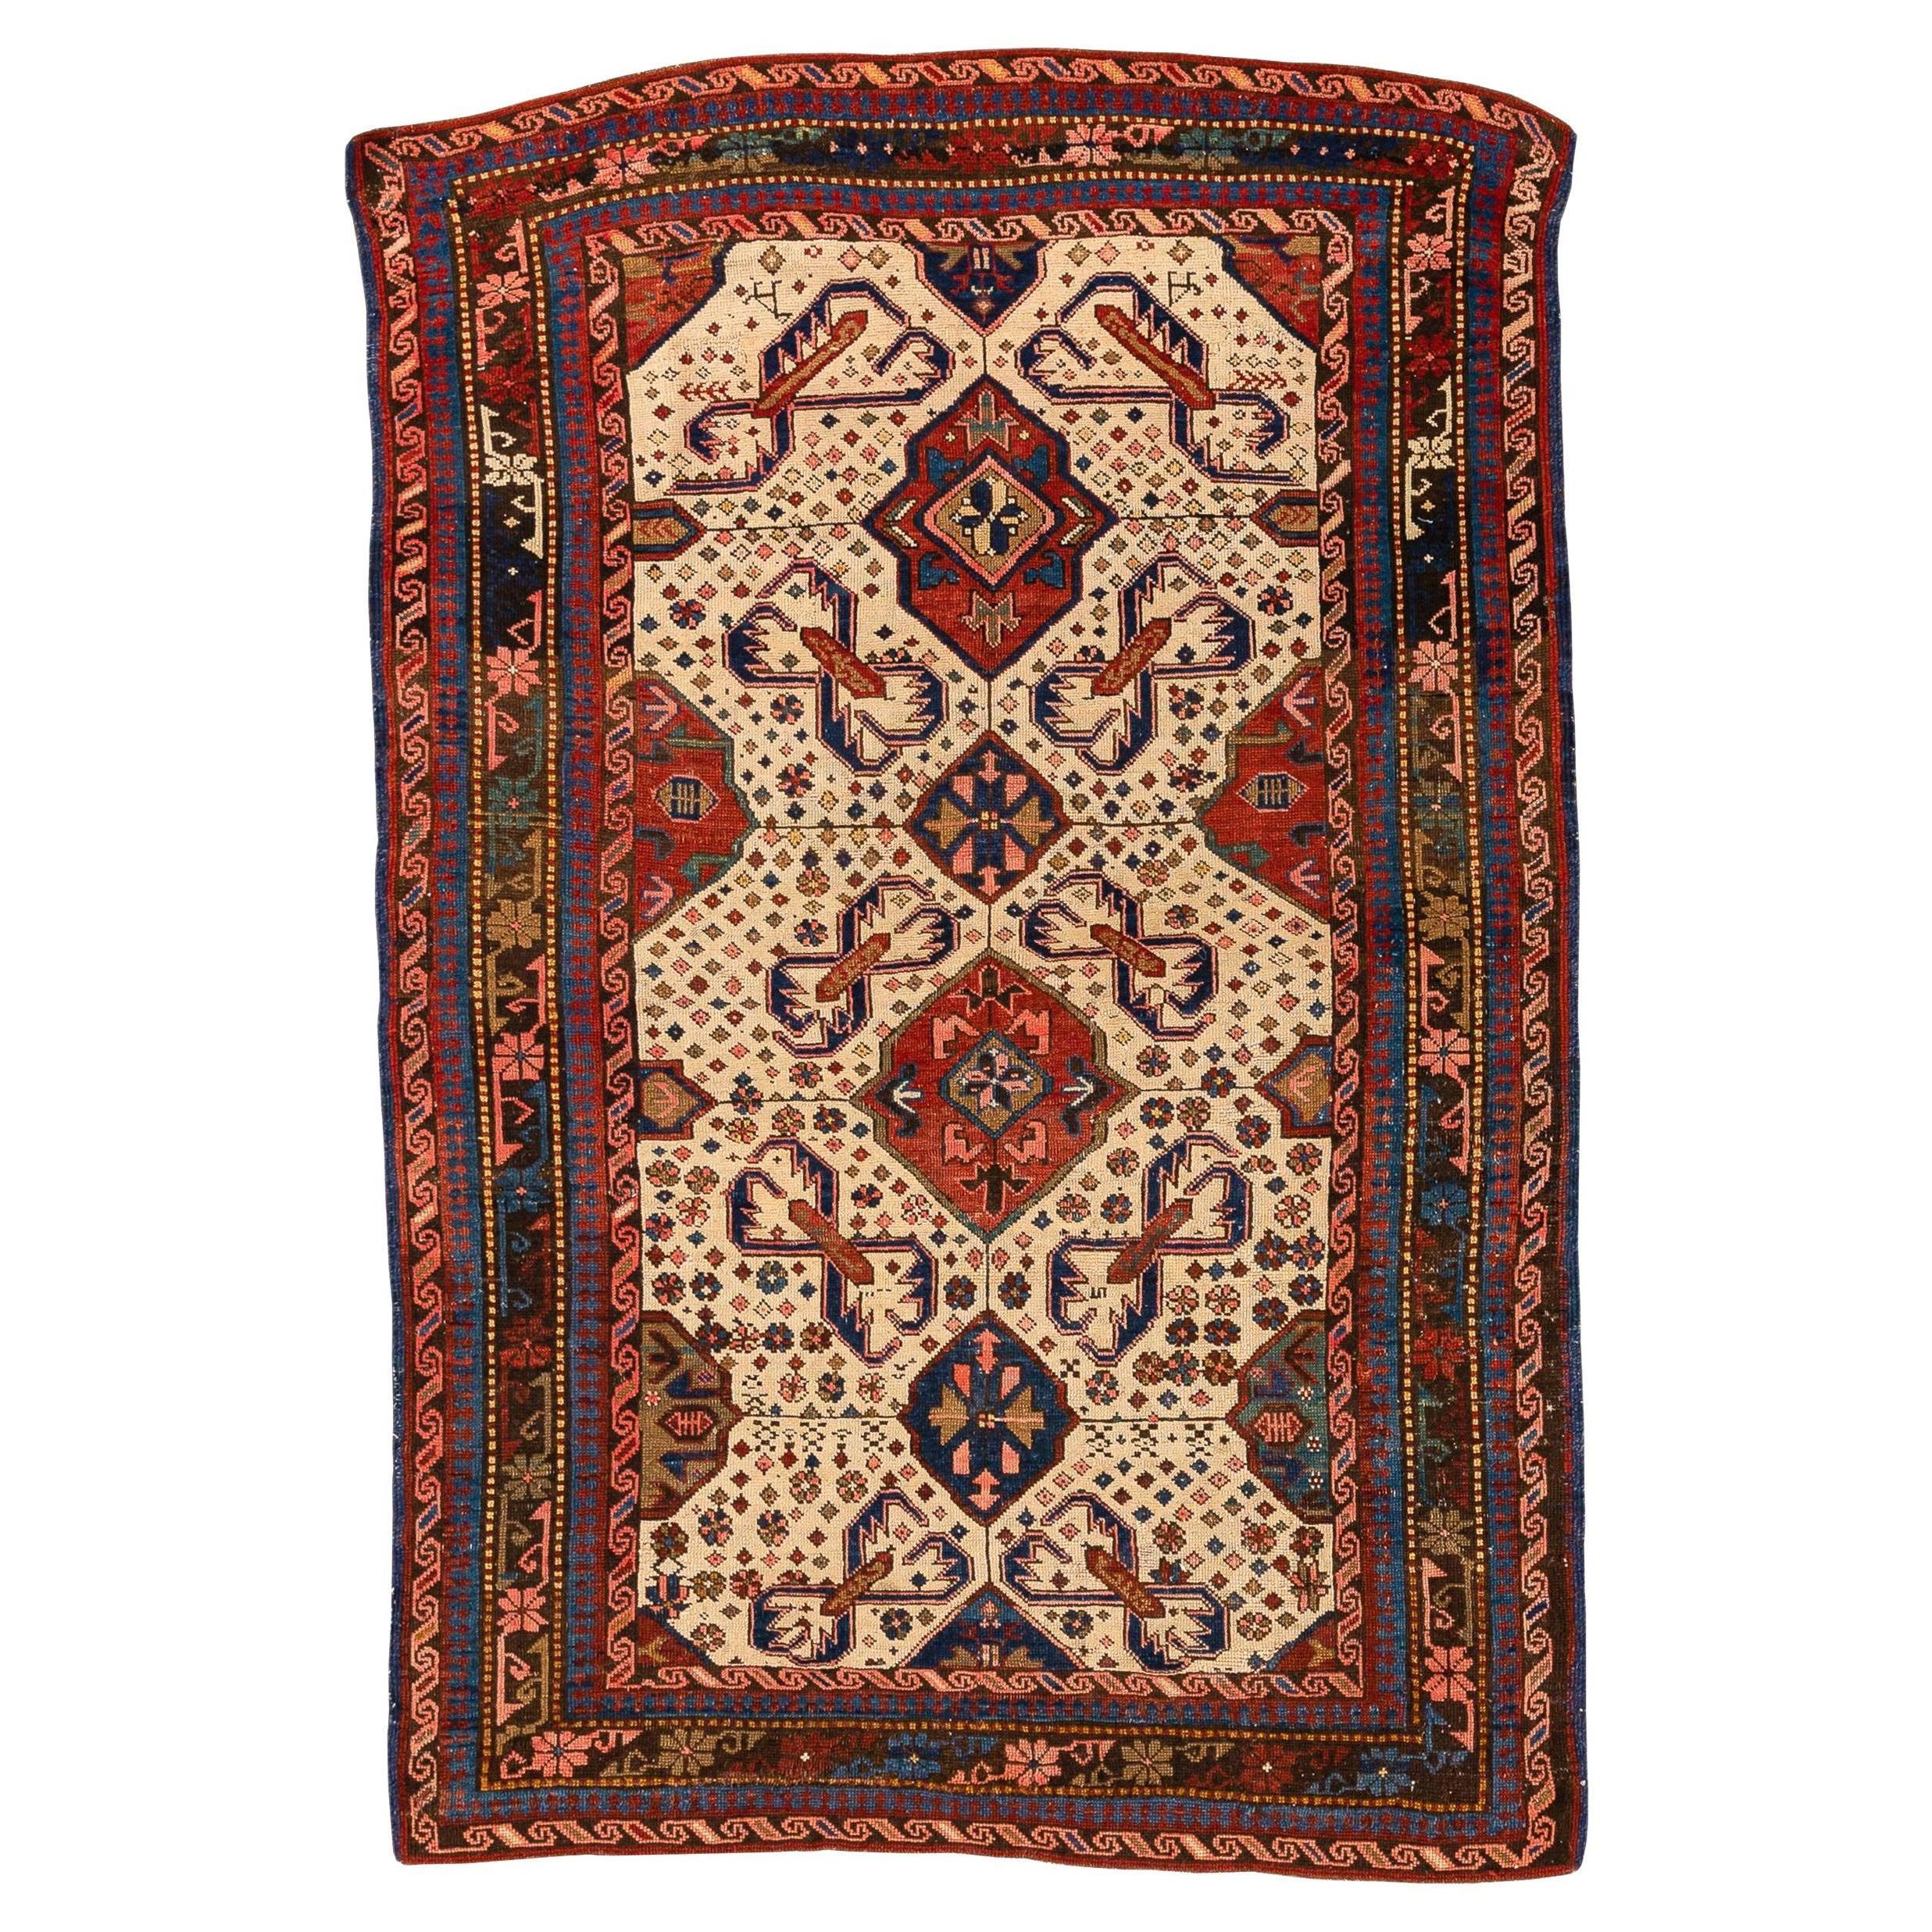 Seychour – Kuba, Northeast Caucasus

This elegant and distinct Seychour rug with an Alpan Crab design features an ivory field filled with geometric figures, including diamonds, flowers, and colourful animals arranged randomly and spontaneously. In